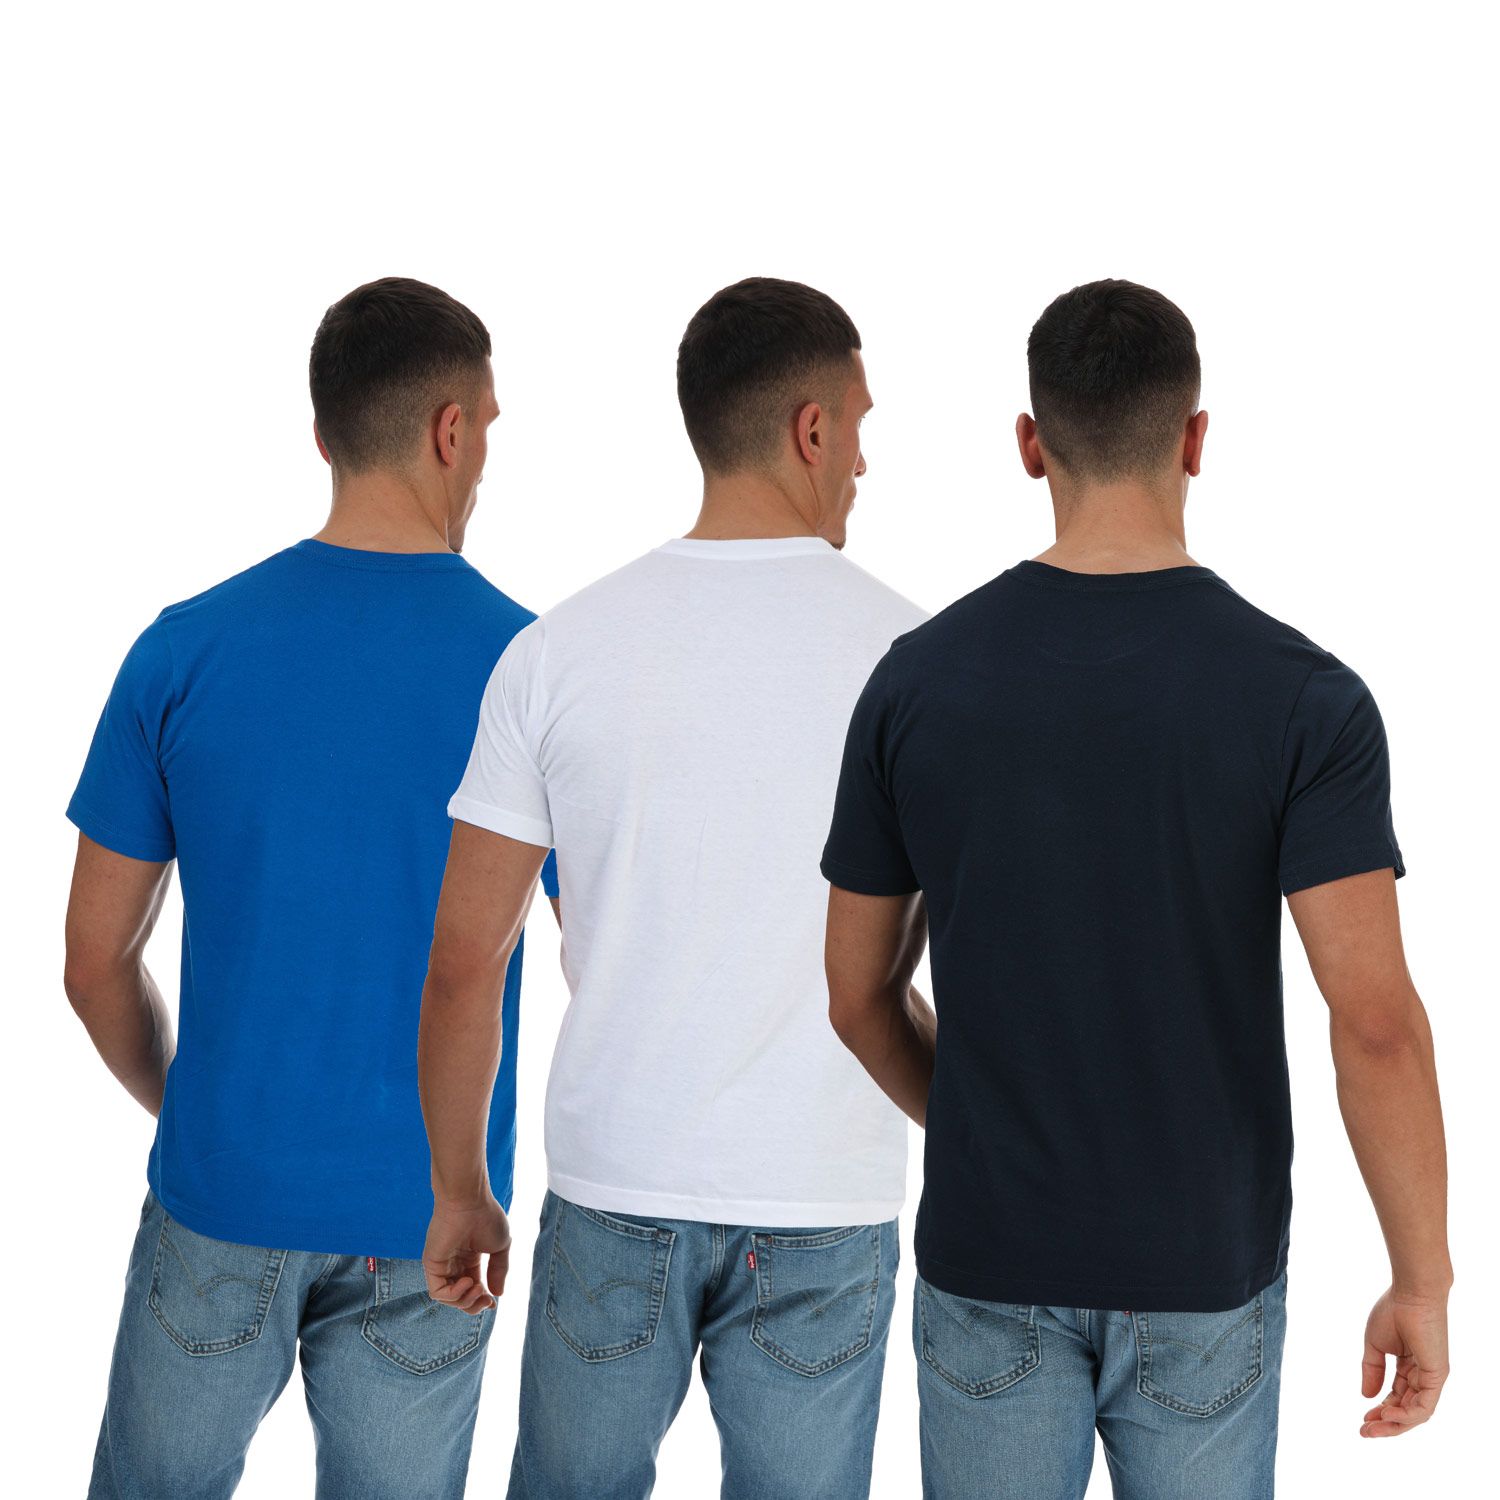 Label Giants Navy White Mens - The Pack Get DKNY T-Shirts 3 Lounge